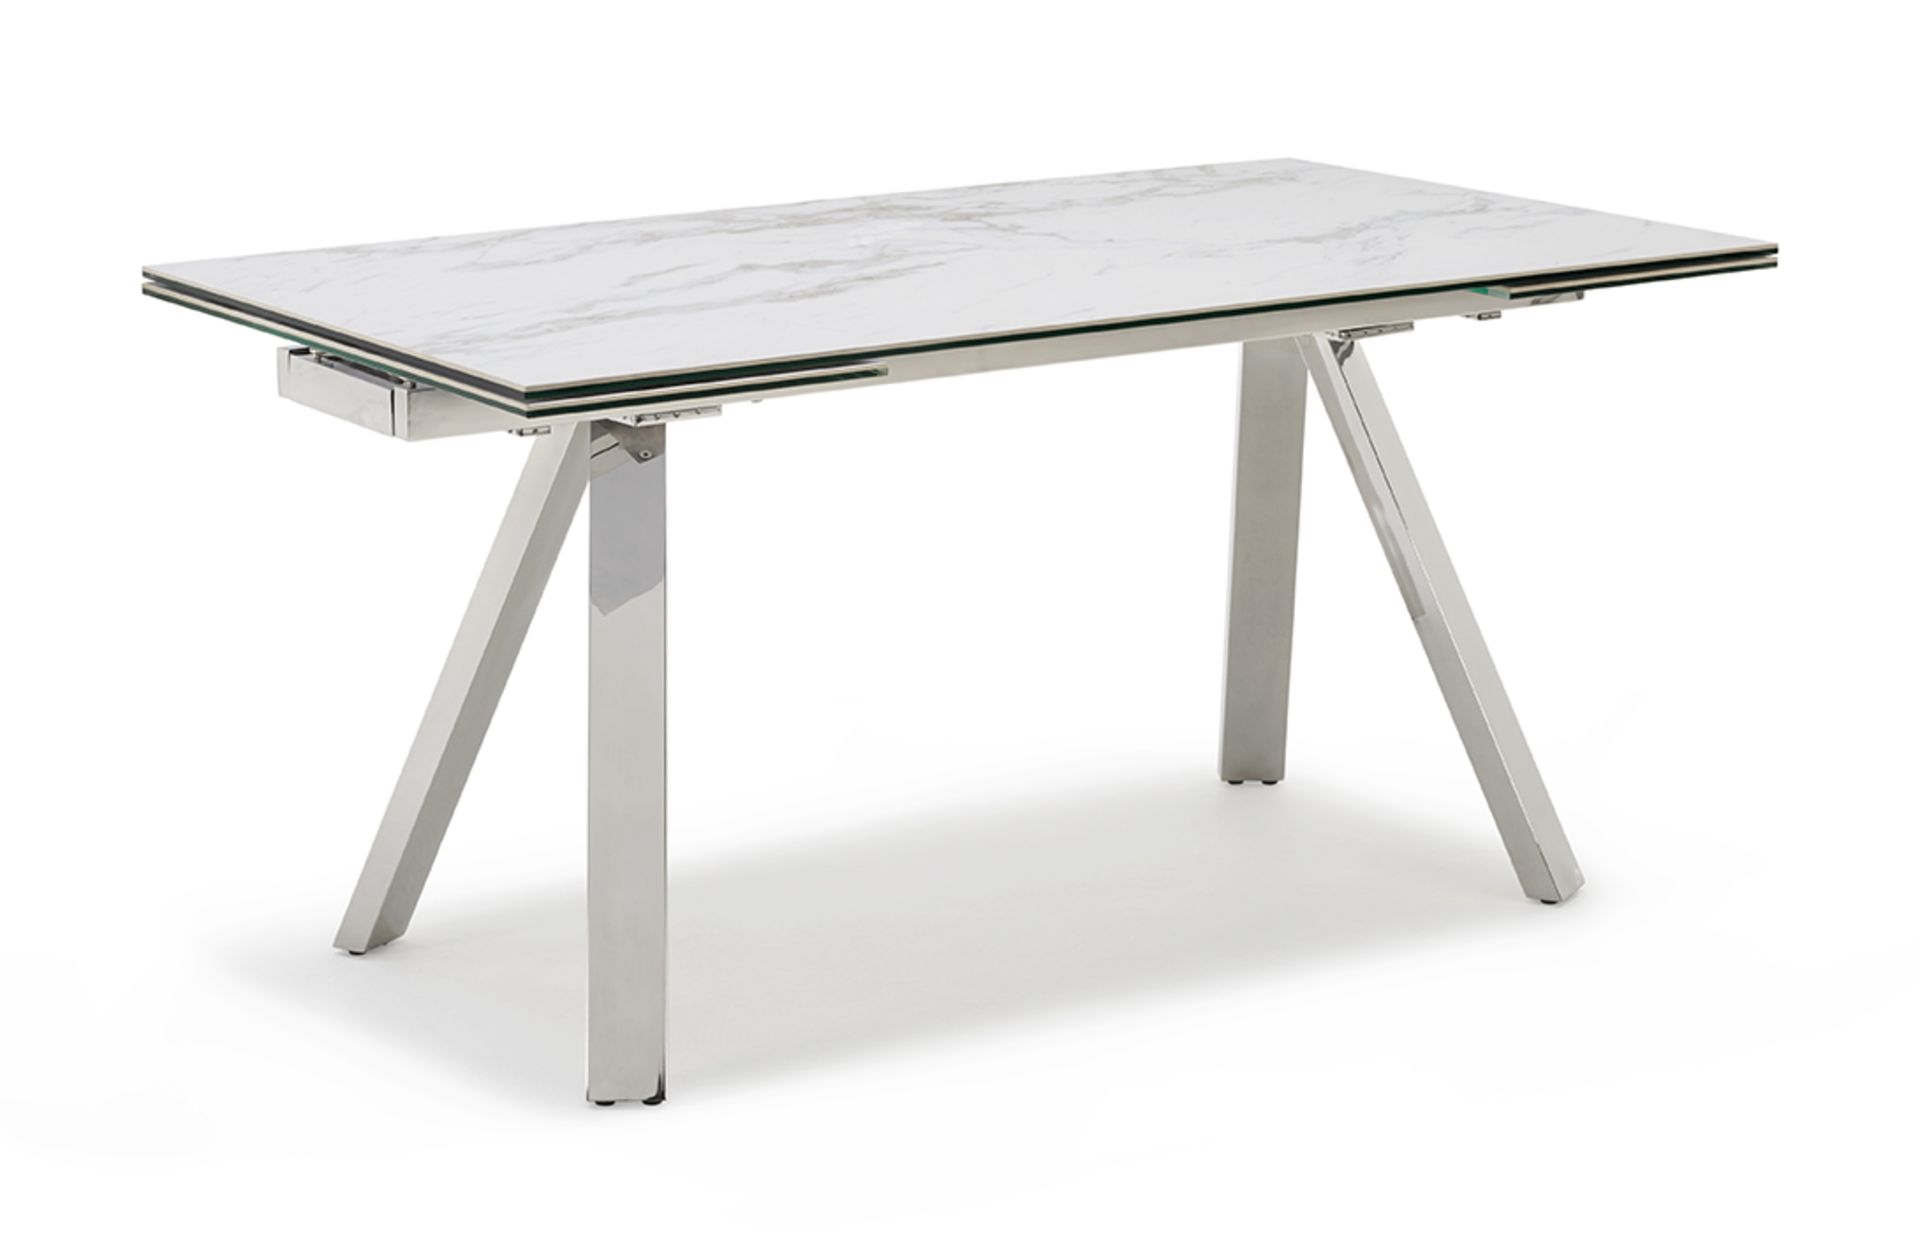 Stromboli Dining Table by Kesterport This glamorous contemporary dining table will add sensational - Image 13 of 13